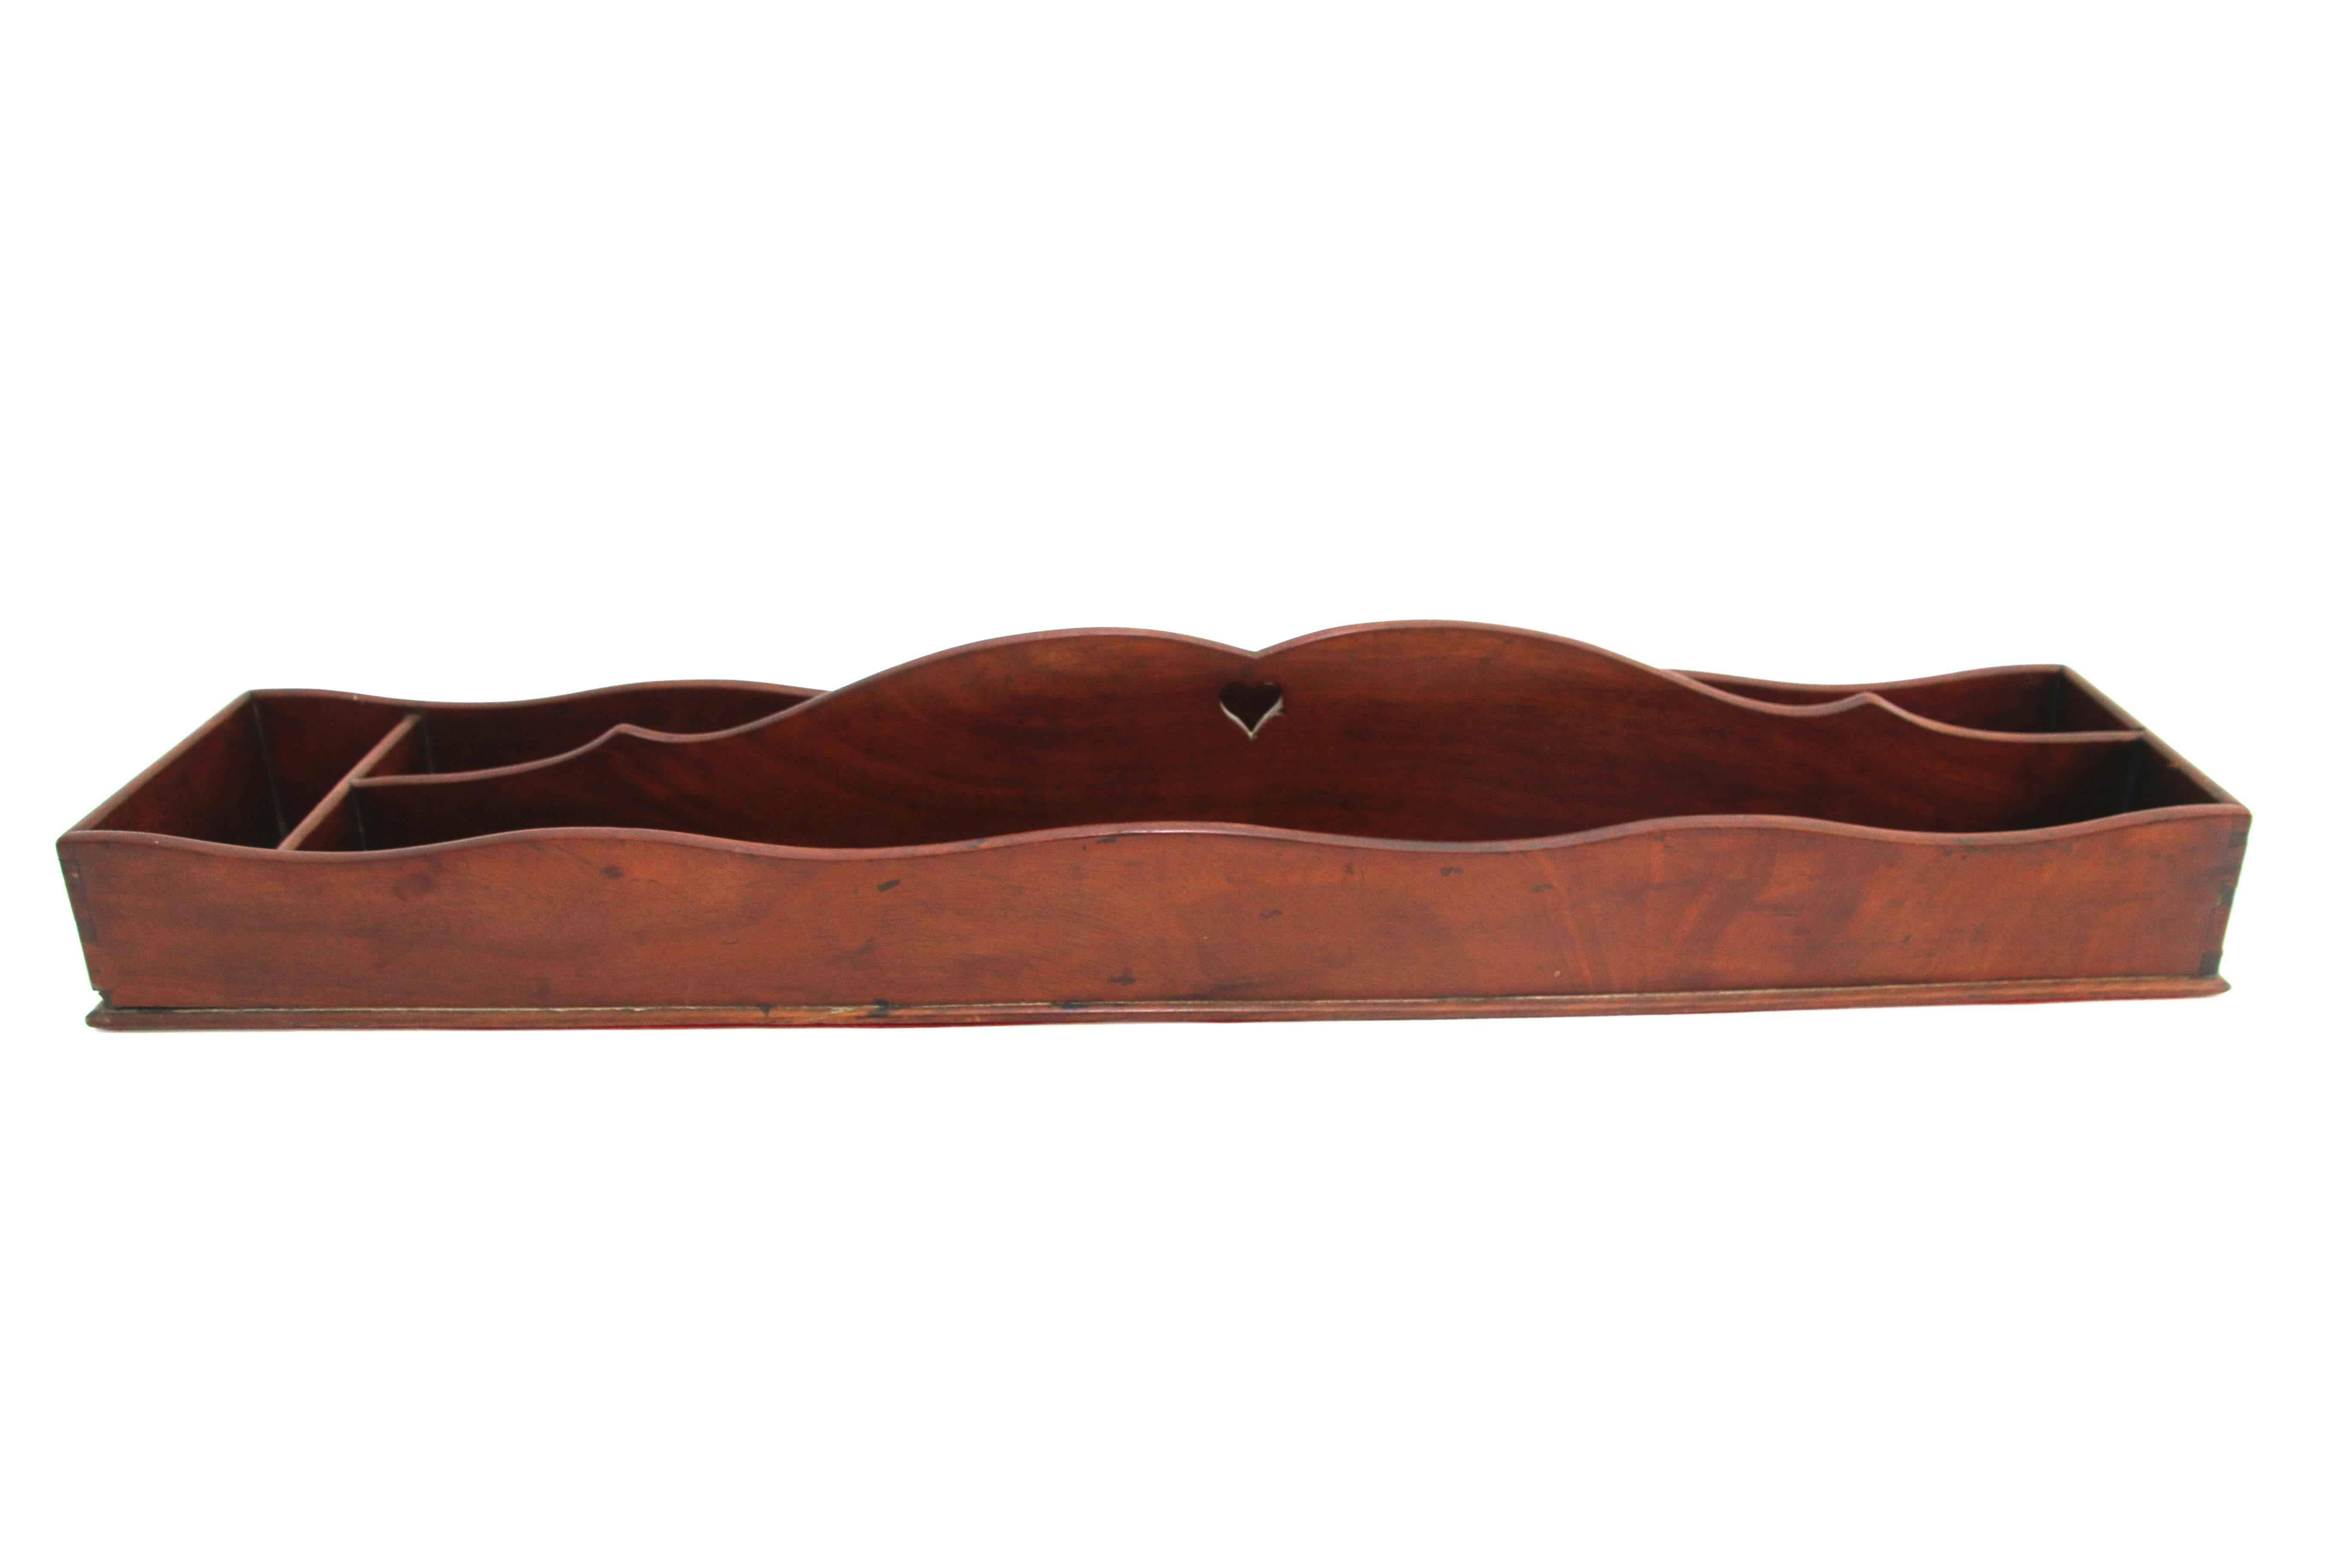 Long mahogany cutlery tray, 19th century, with pierced heart handle divider, dovetail construction, and end with narrow compartment. 

Red felt added to underside.

Minor loss at corner as noted in photograph.

Measures: 26.5 inches long by